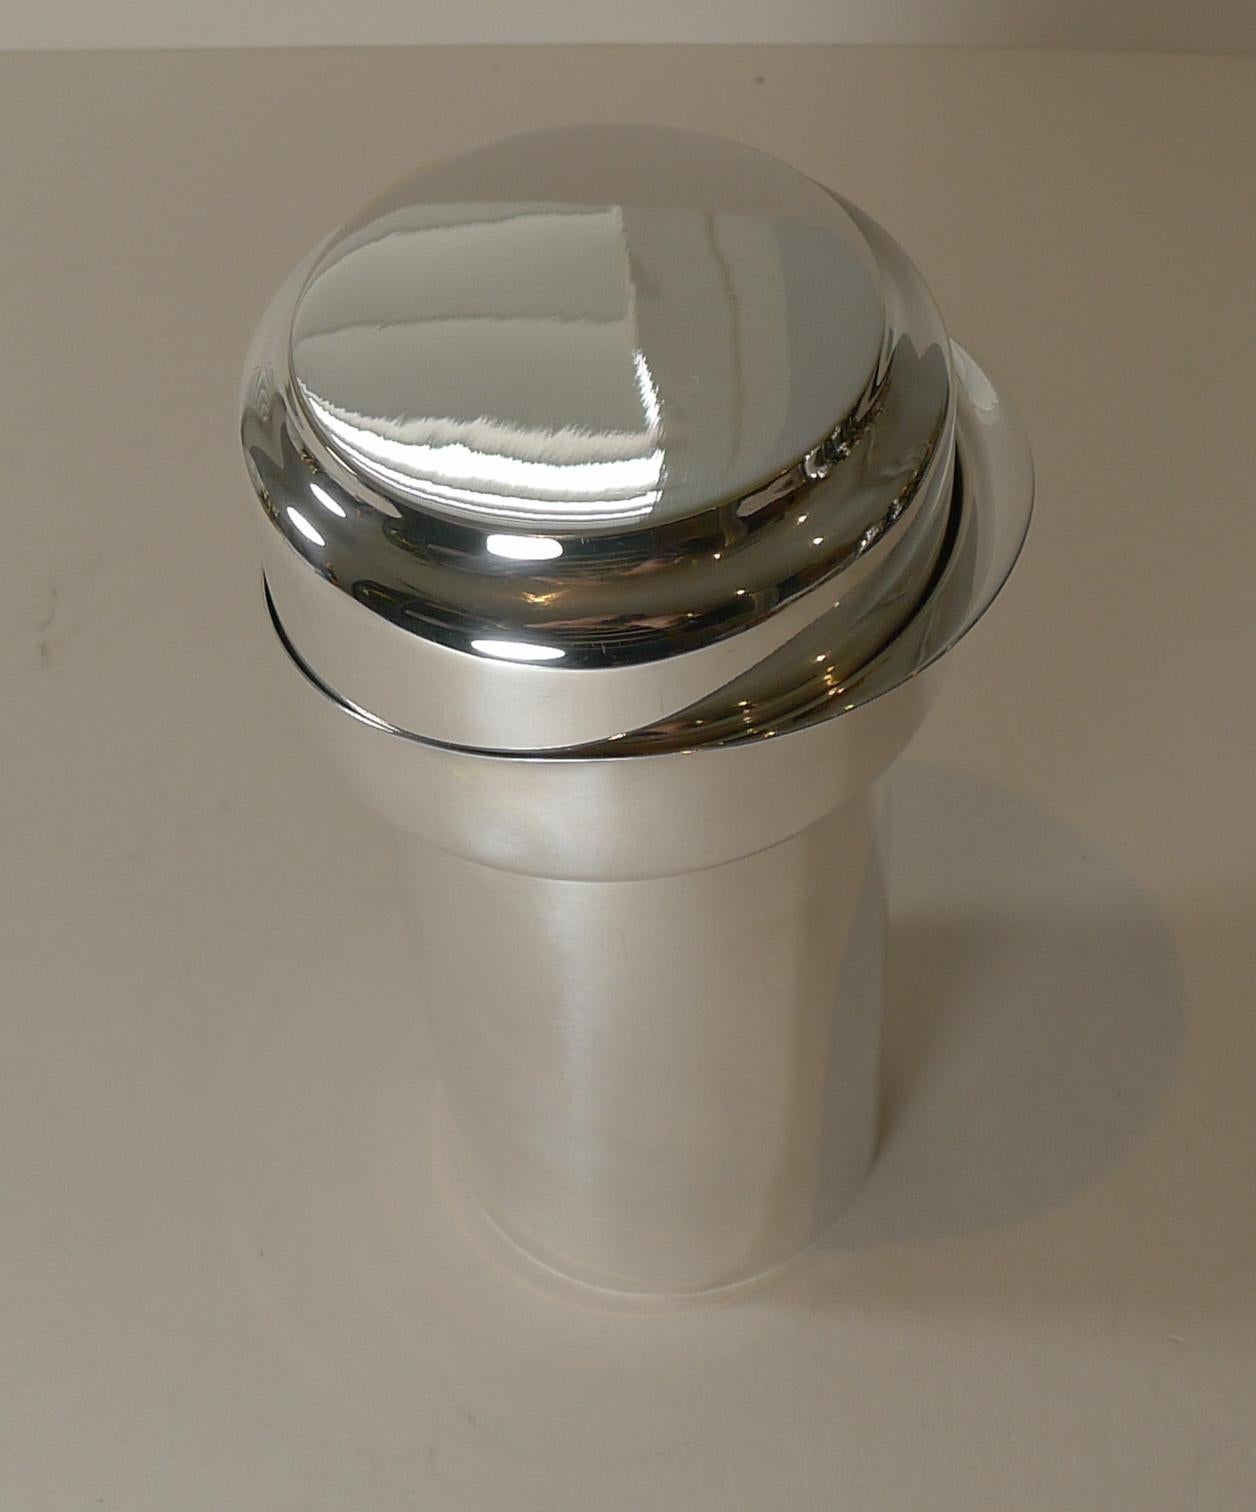 Vintage Italian Silver Plated Cocktail Shaker by Lino Sabattini, c.1960 For Sale 10